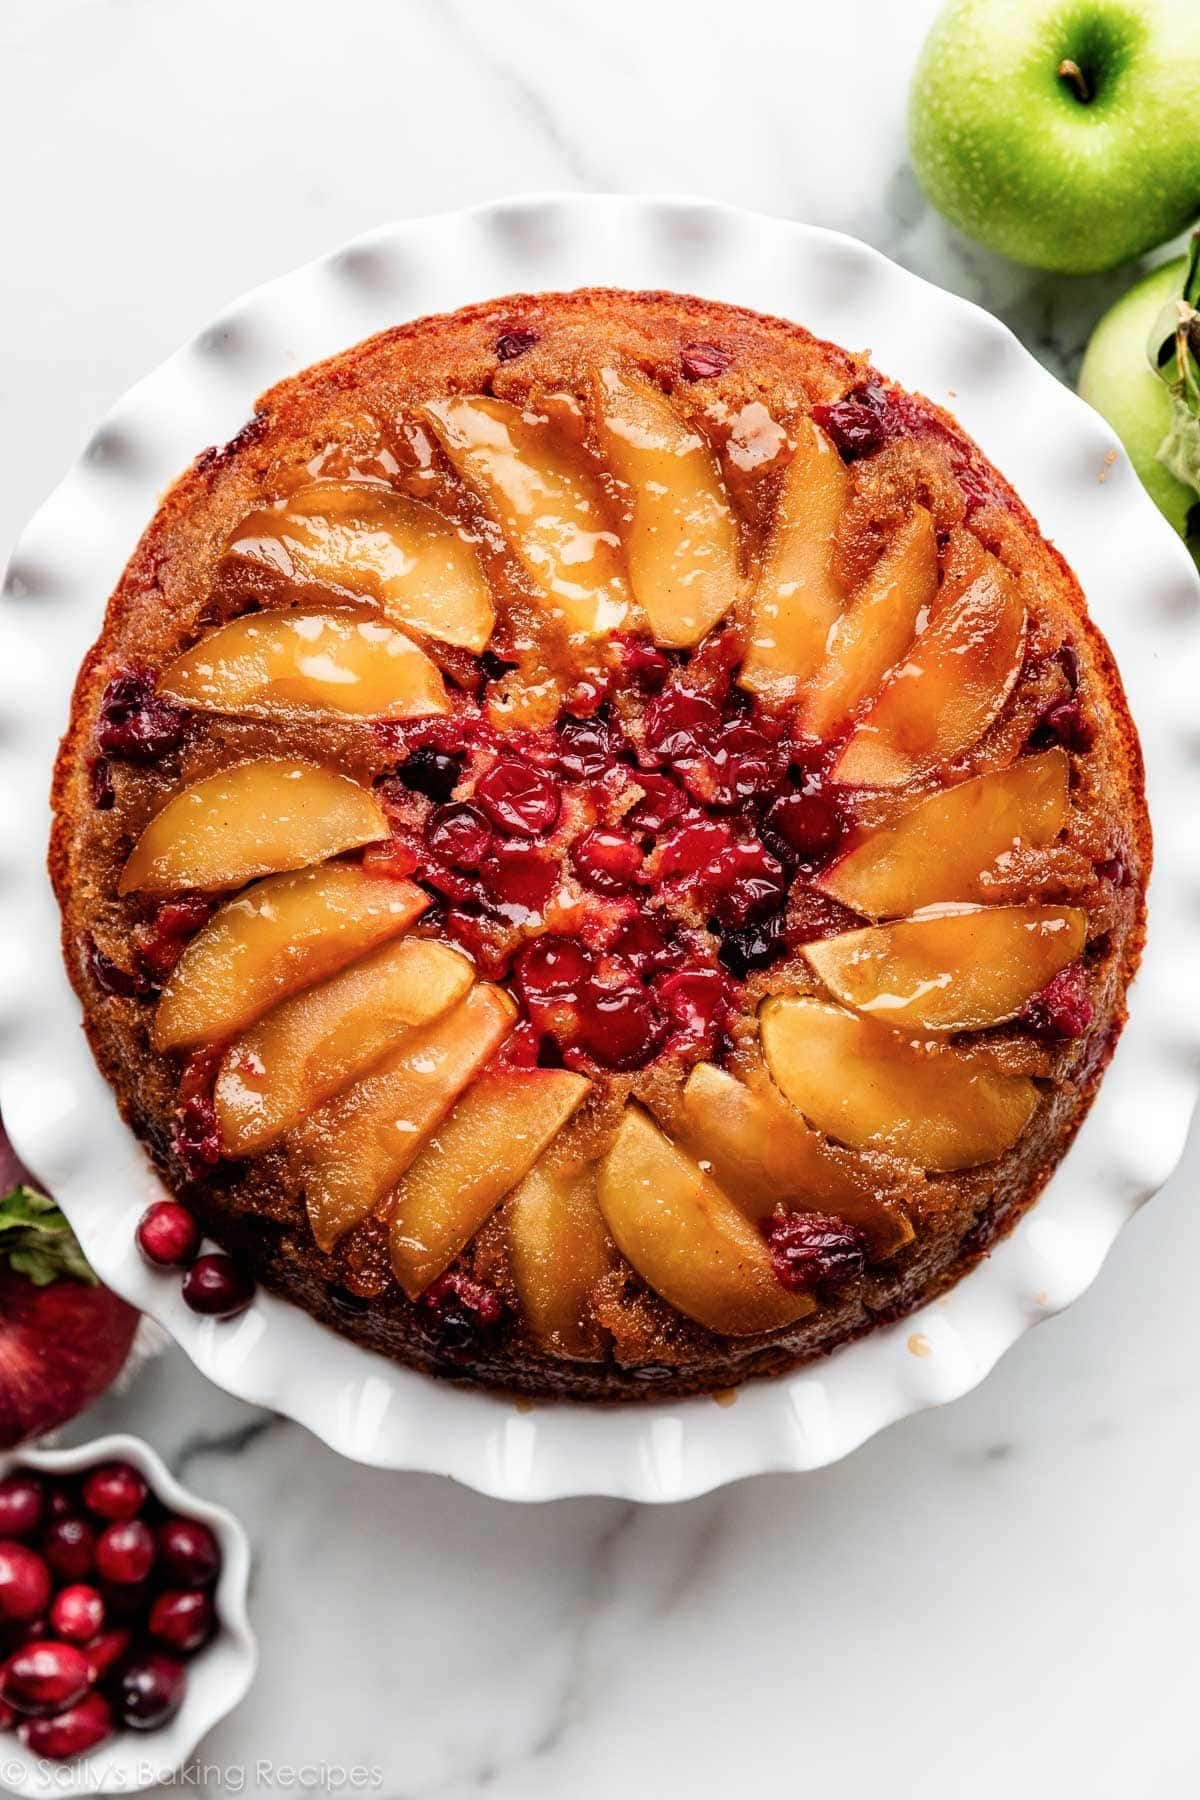 Upside down cake topped with slices of apples and cranberries with syrup. 